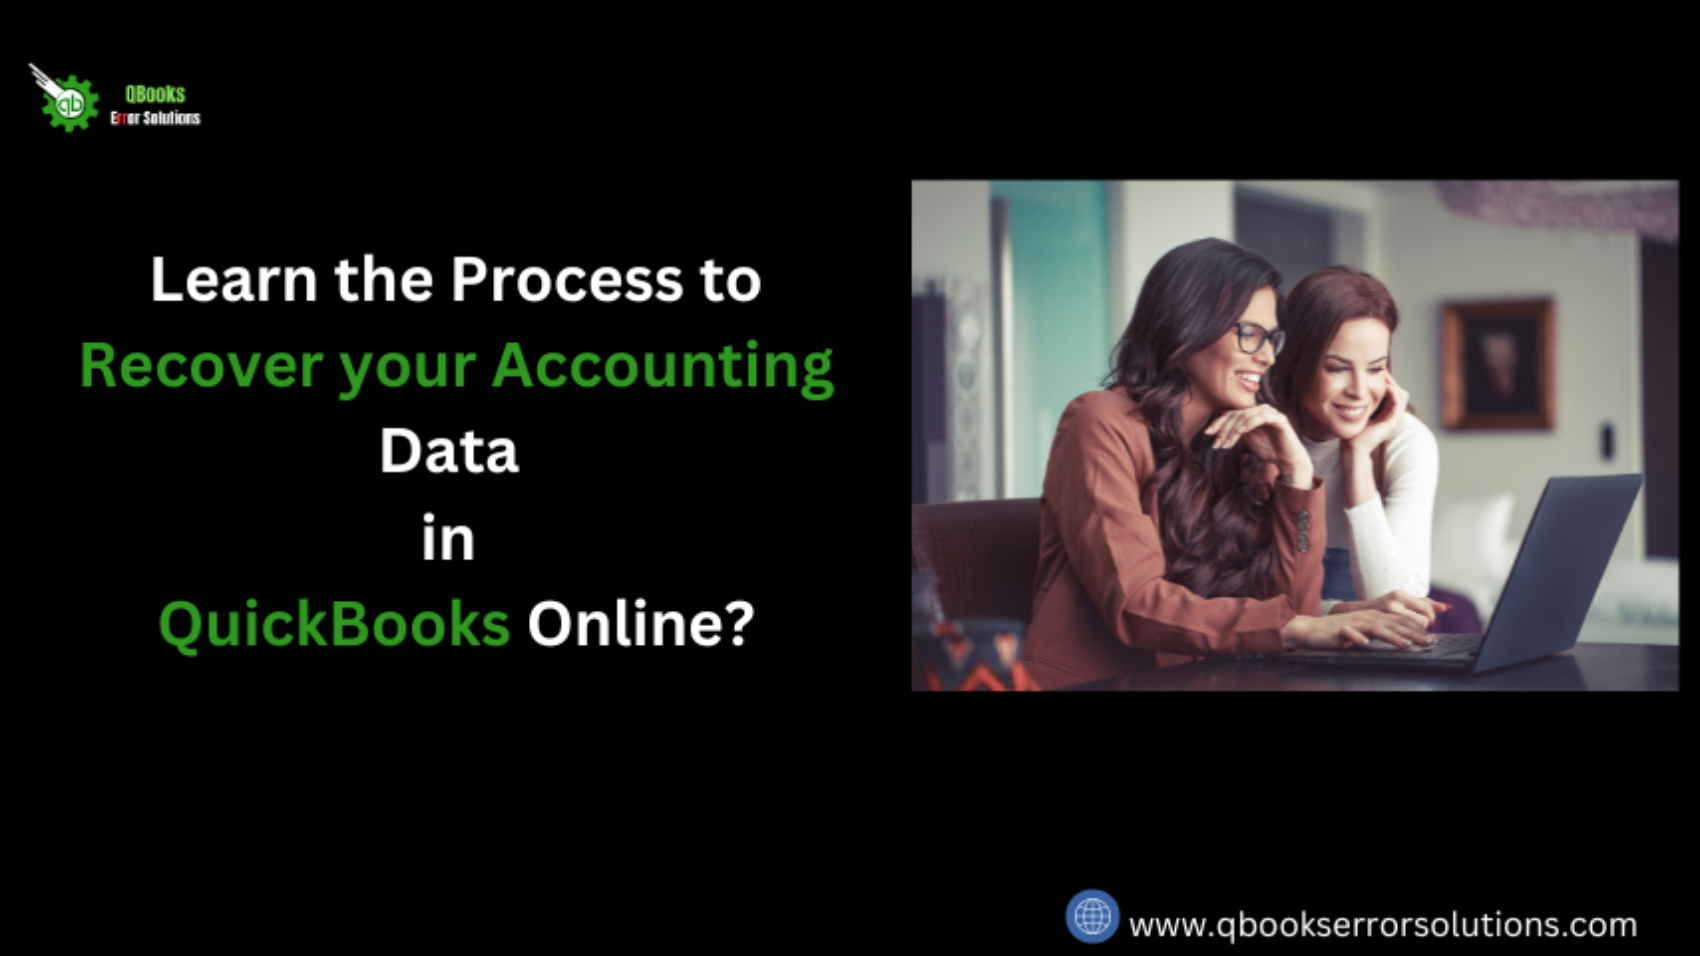 How to Easily Recover your Accounting Data in QuickBooks Online